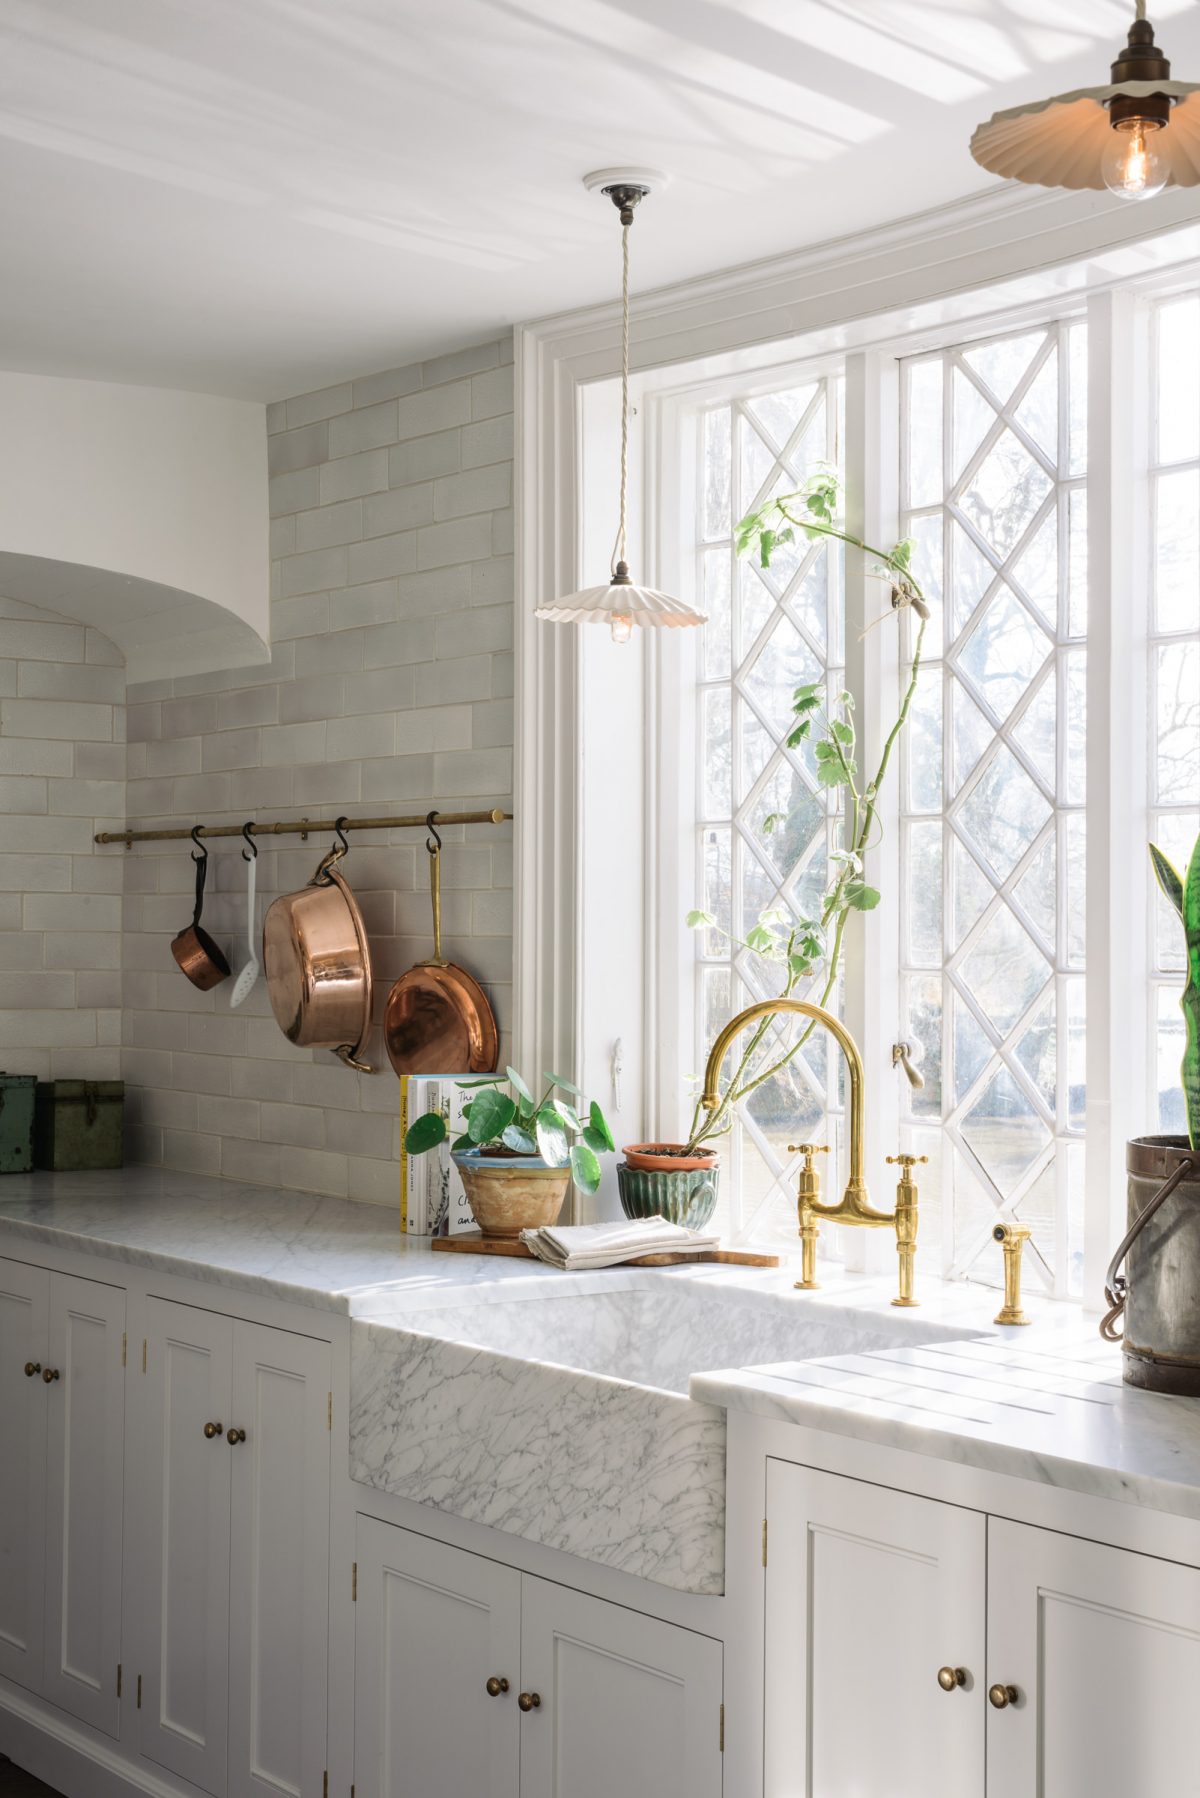 Carrara marble worktops and a deVOL Milano Penthouse marble sink, a dreamy combination.